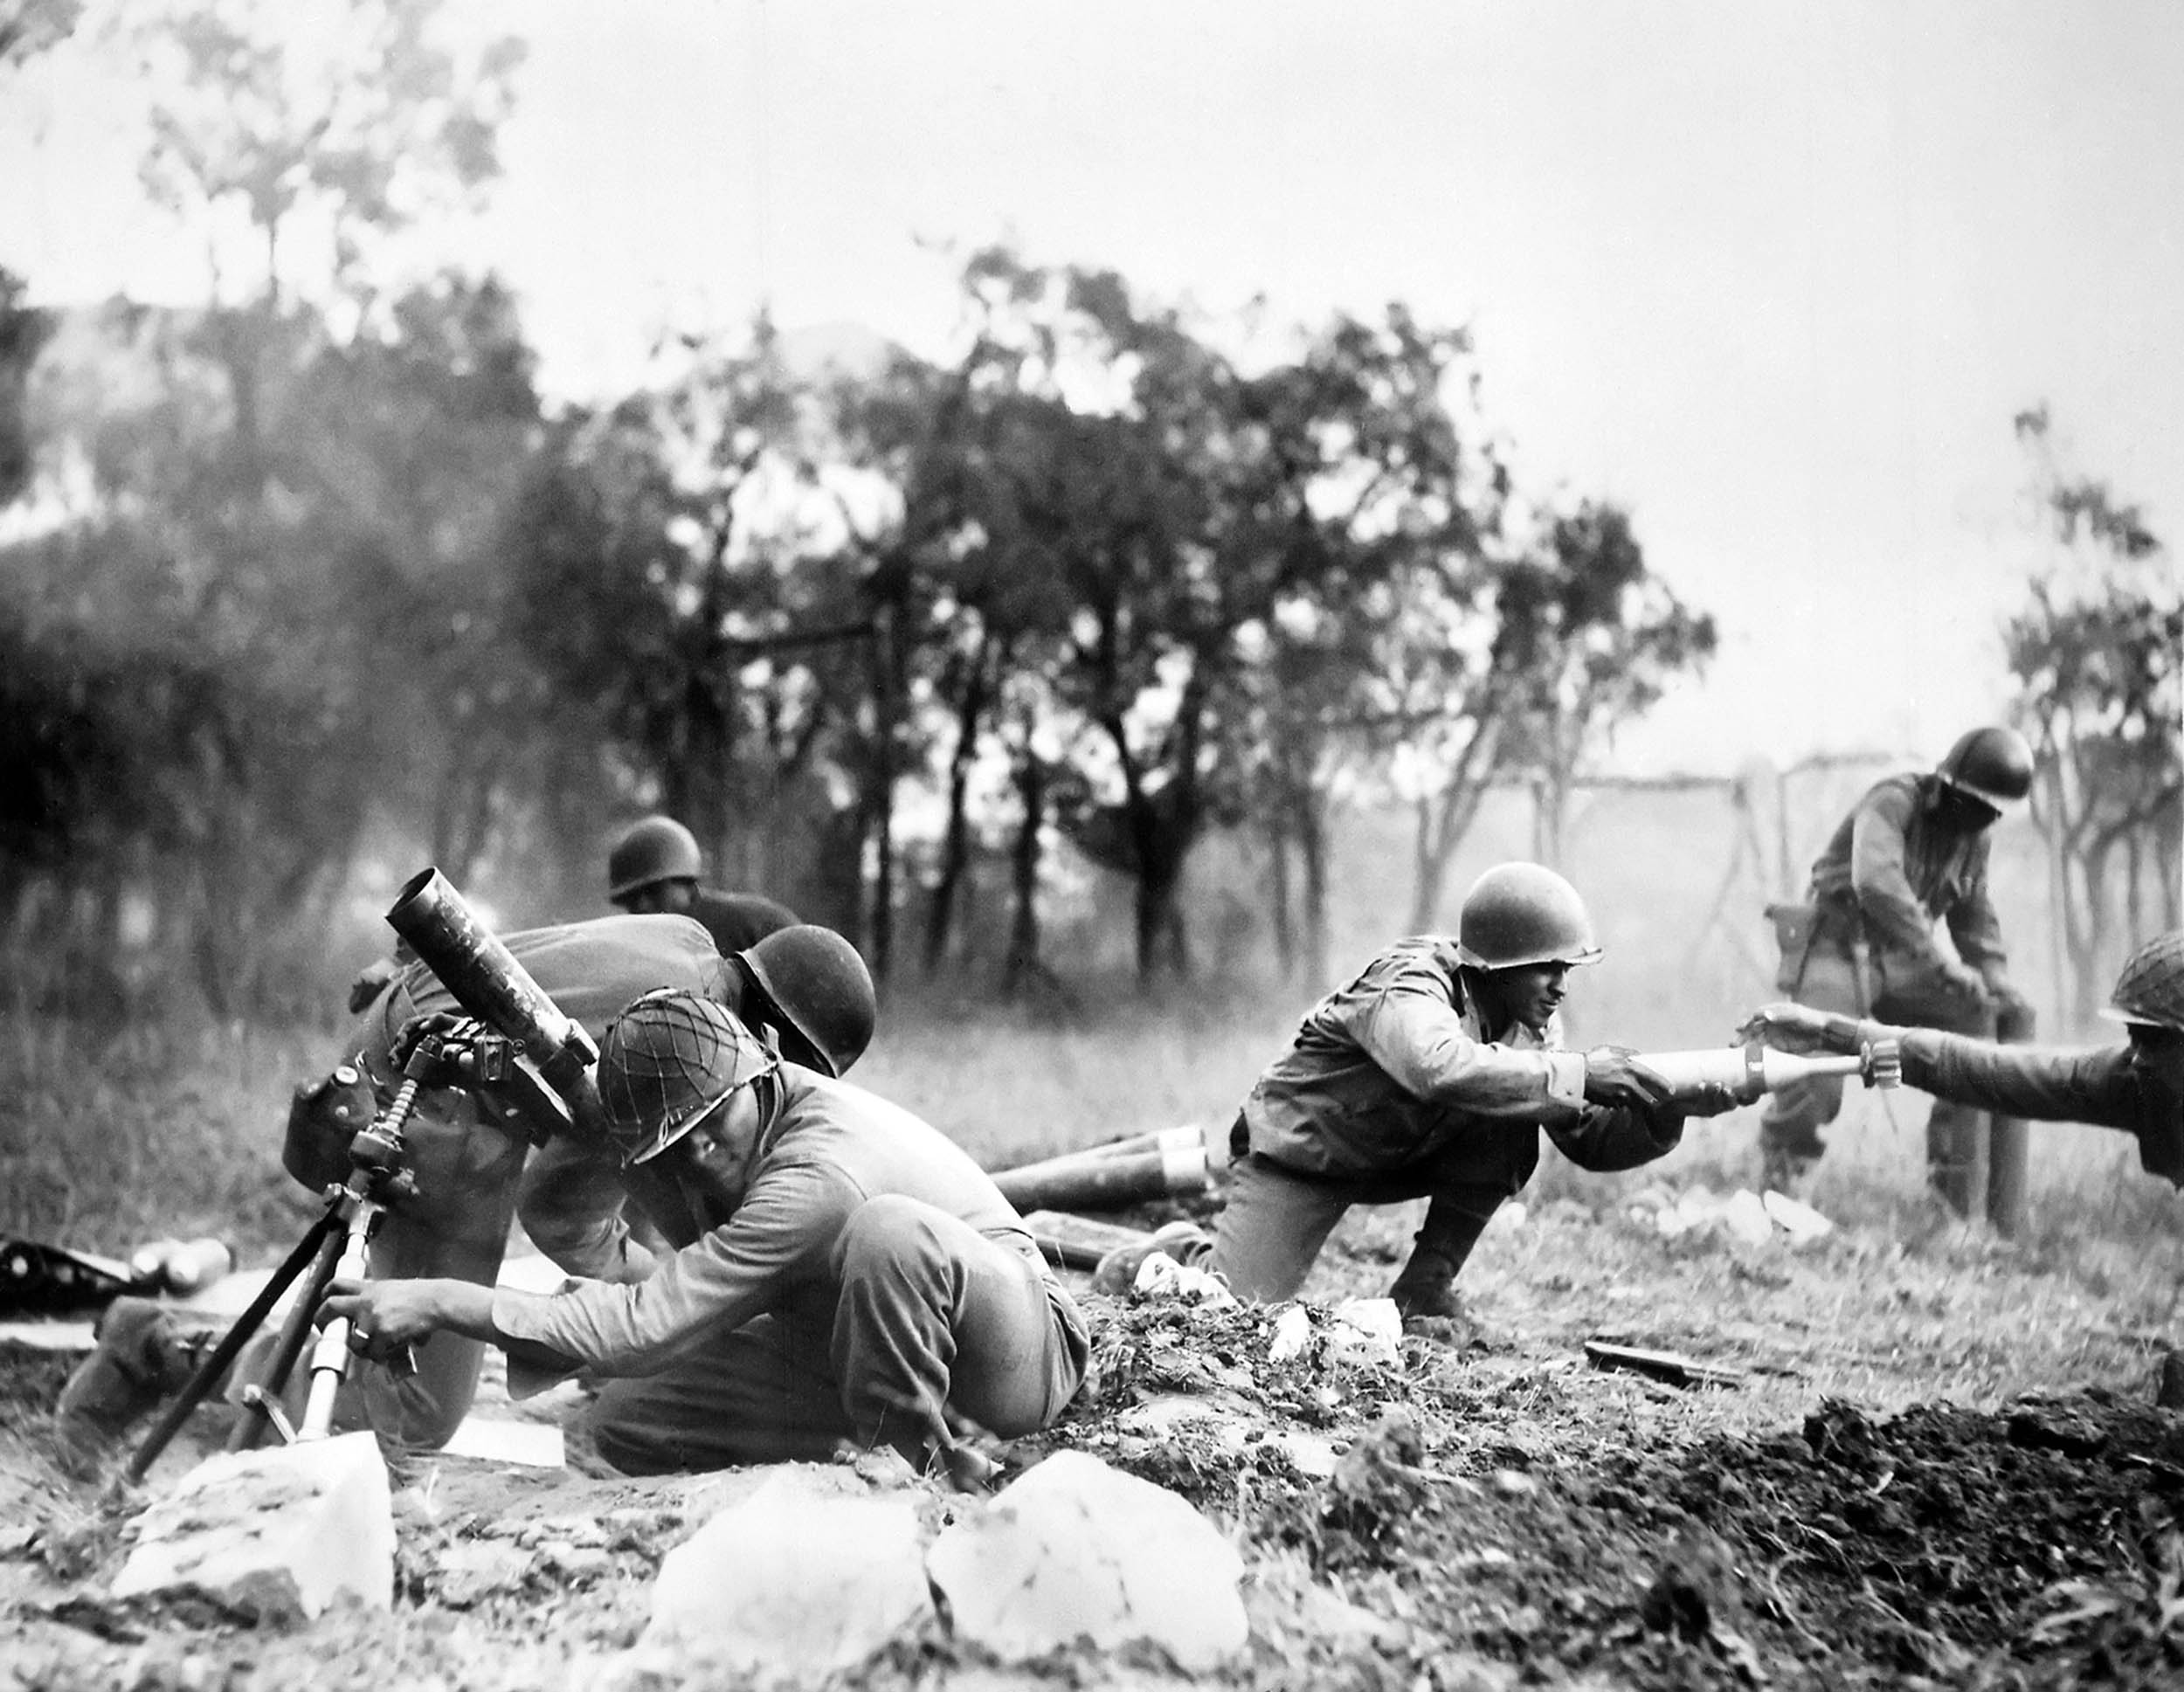 Soldiers of 92nd Infantry Division operate mortar near Massa, Italy, November 1944 (U.S. Army/National Archives and Records Administration)